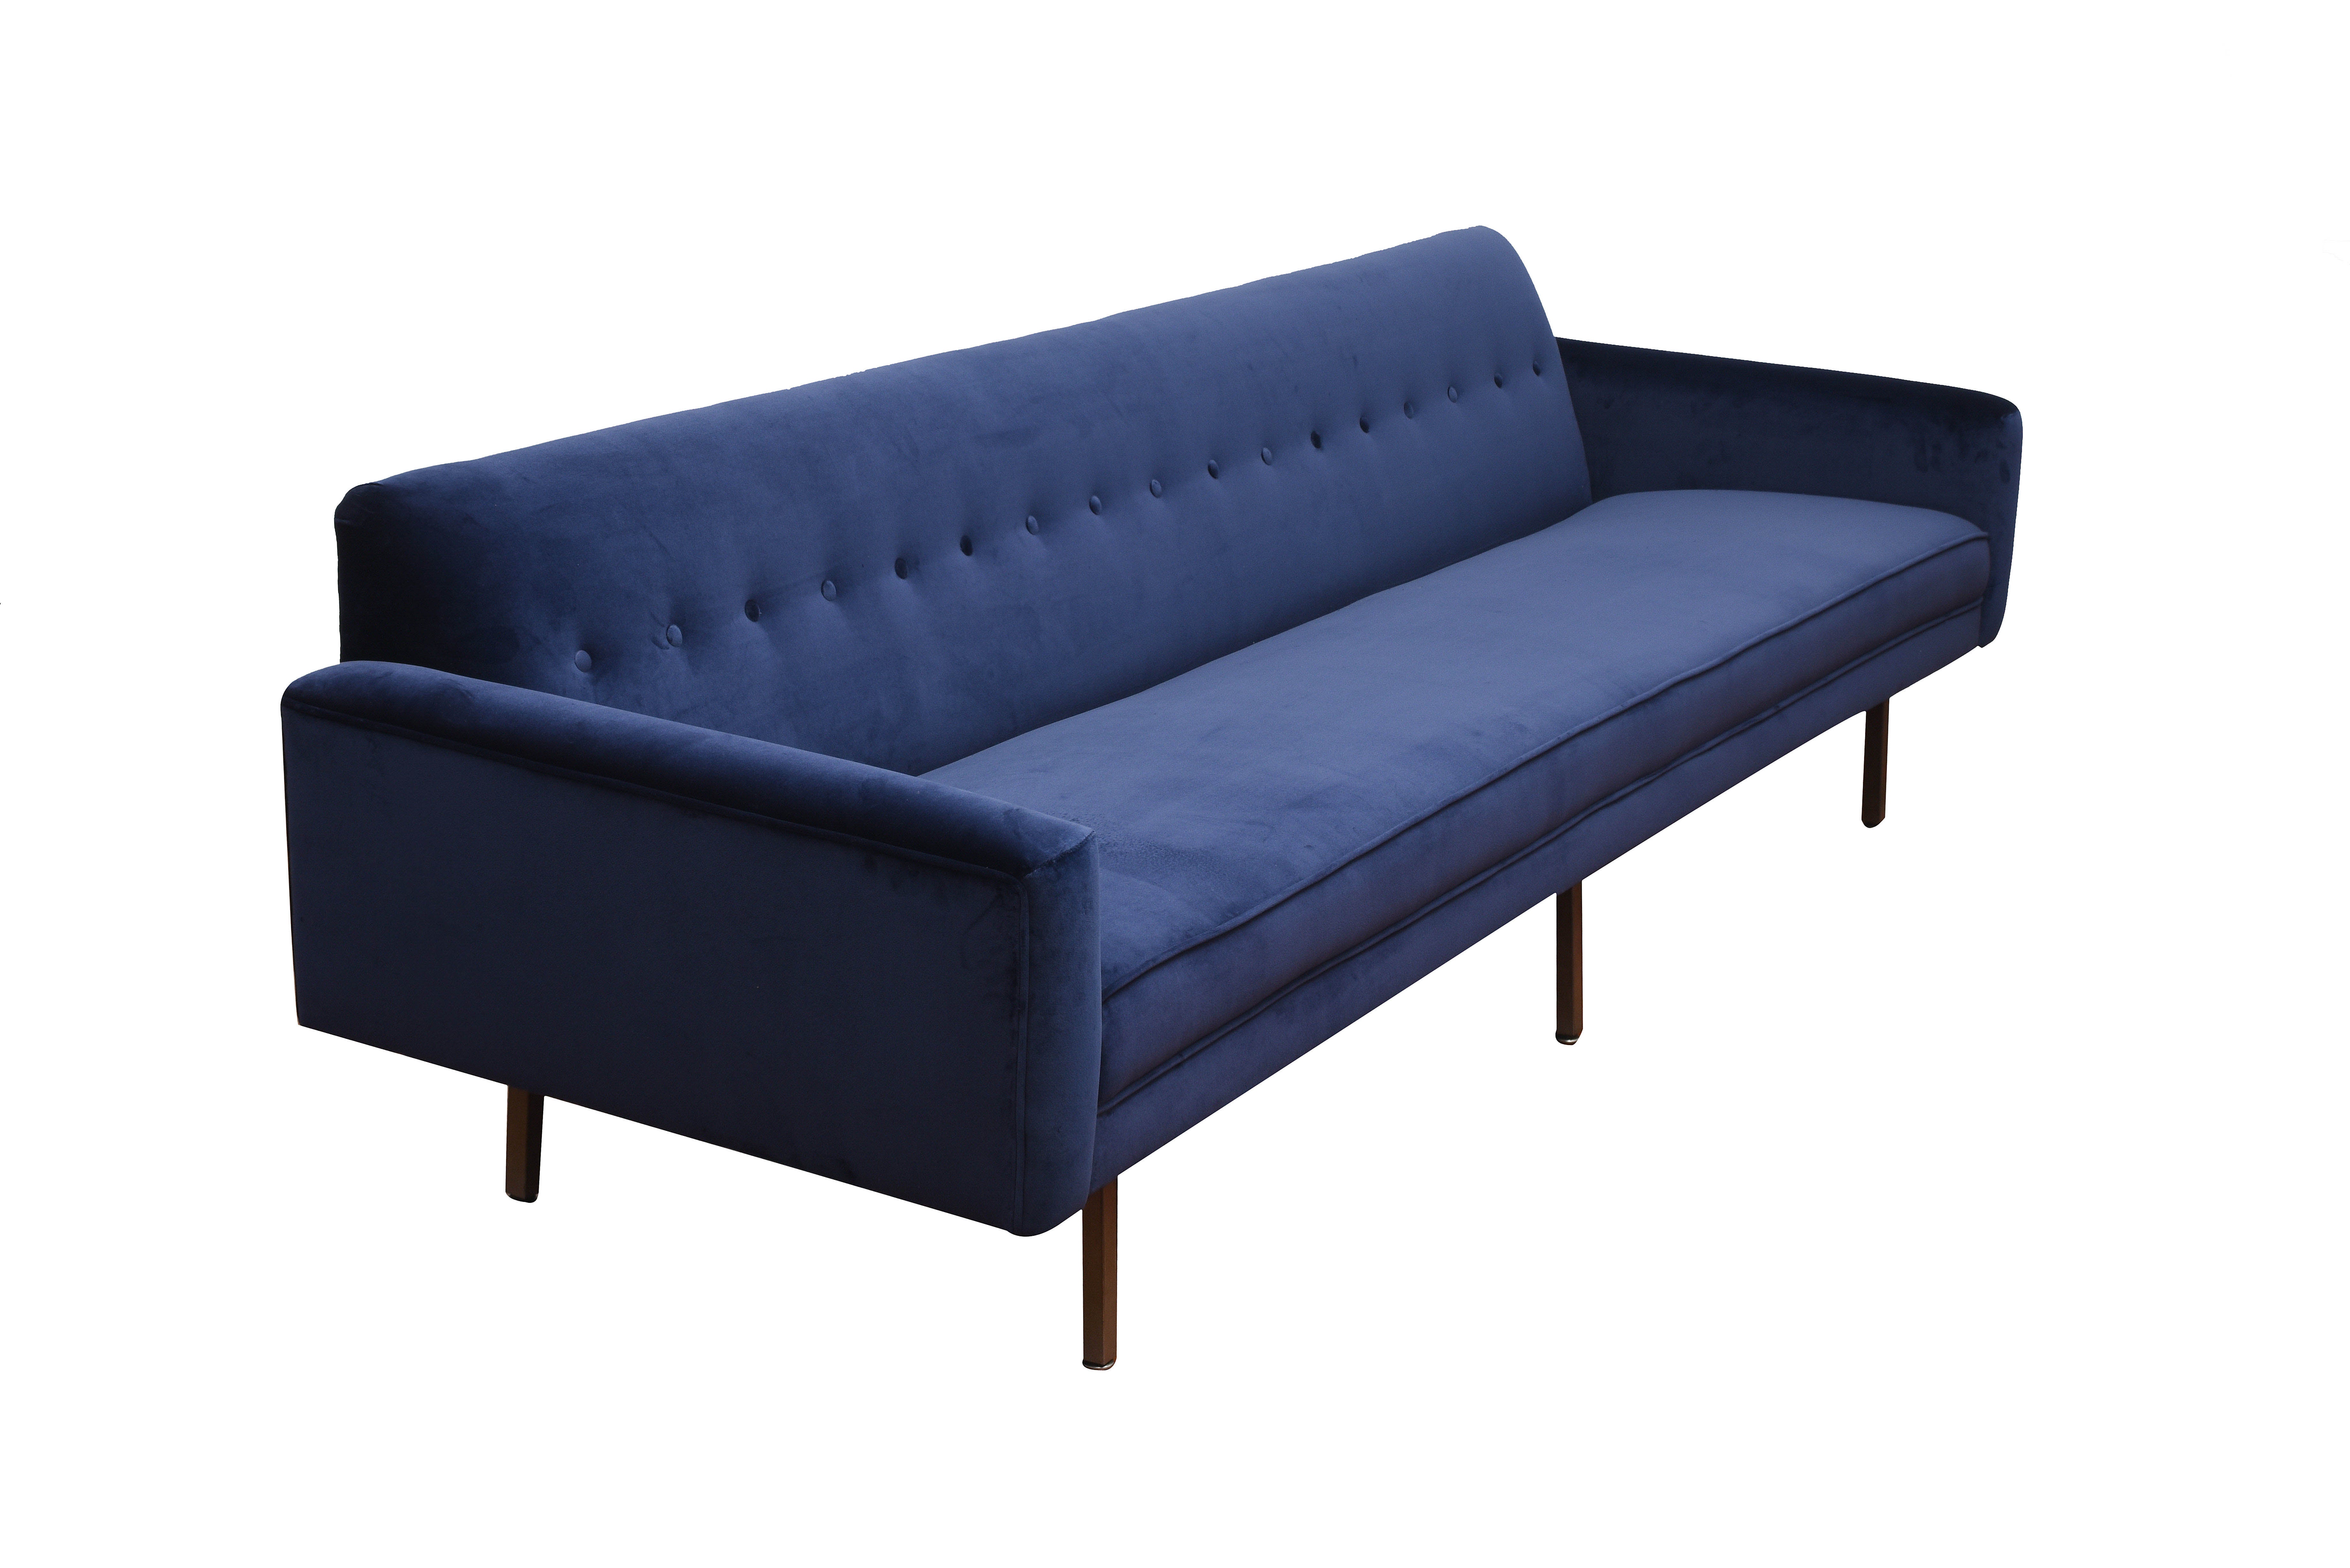 George Nelson, sofa produced by ICF in 1958.
Blue velvet sofa with metal feet.
Measures: Cm 243 x 77 x 70 H.